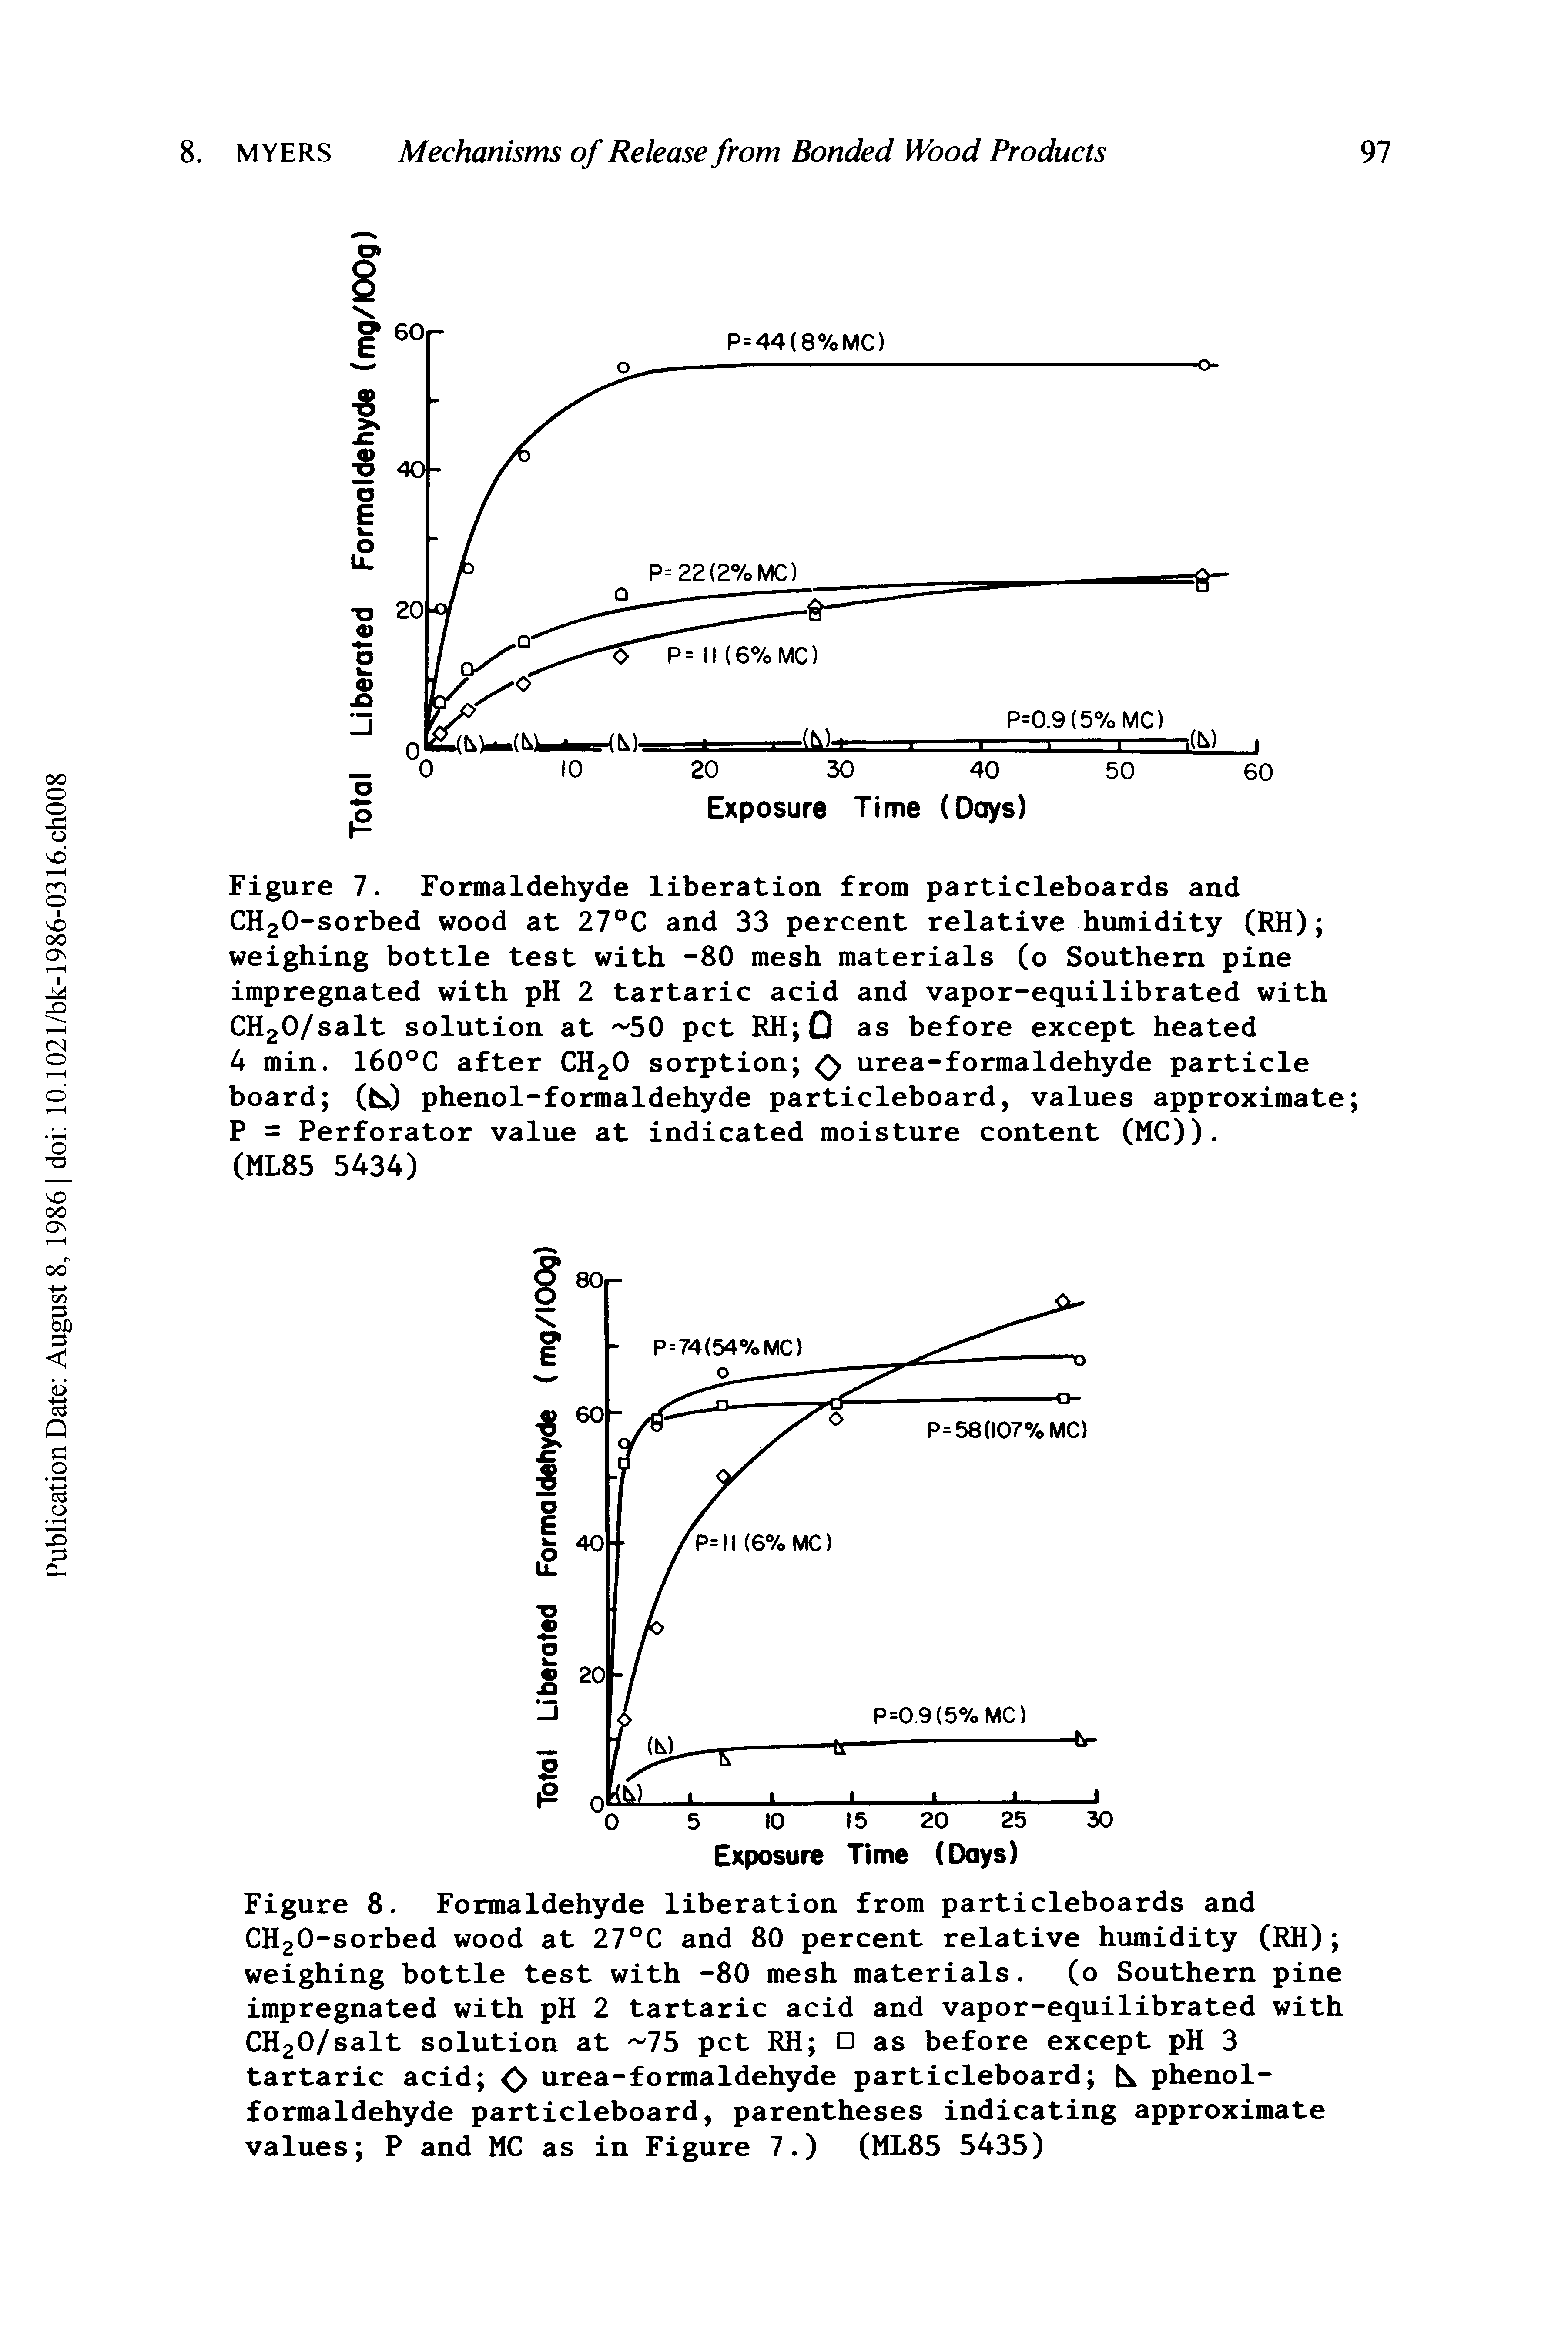 Figure 7. Formaldehyde liberation from particleboards and CH20-sorbed wood at 27°C and 33 percent relative humidity (RH) weighing bottle test with -80 mesh materials (o Southern pine impregnated with pH 2 tartaric acid and vapor-equilibrated with CH20/salt solution at pet RH O as before except heated 4 min. 16O°C after CH2O sorption 0 urea-formaldehyde particle board (b) phenol-formaldehyde particleboard, values approximate P = Perforator value at indicated moisture content (MC)).